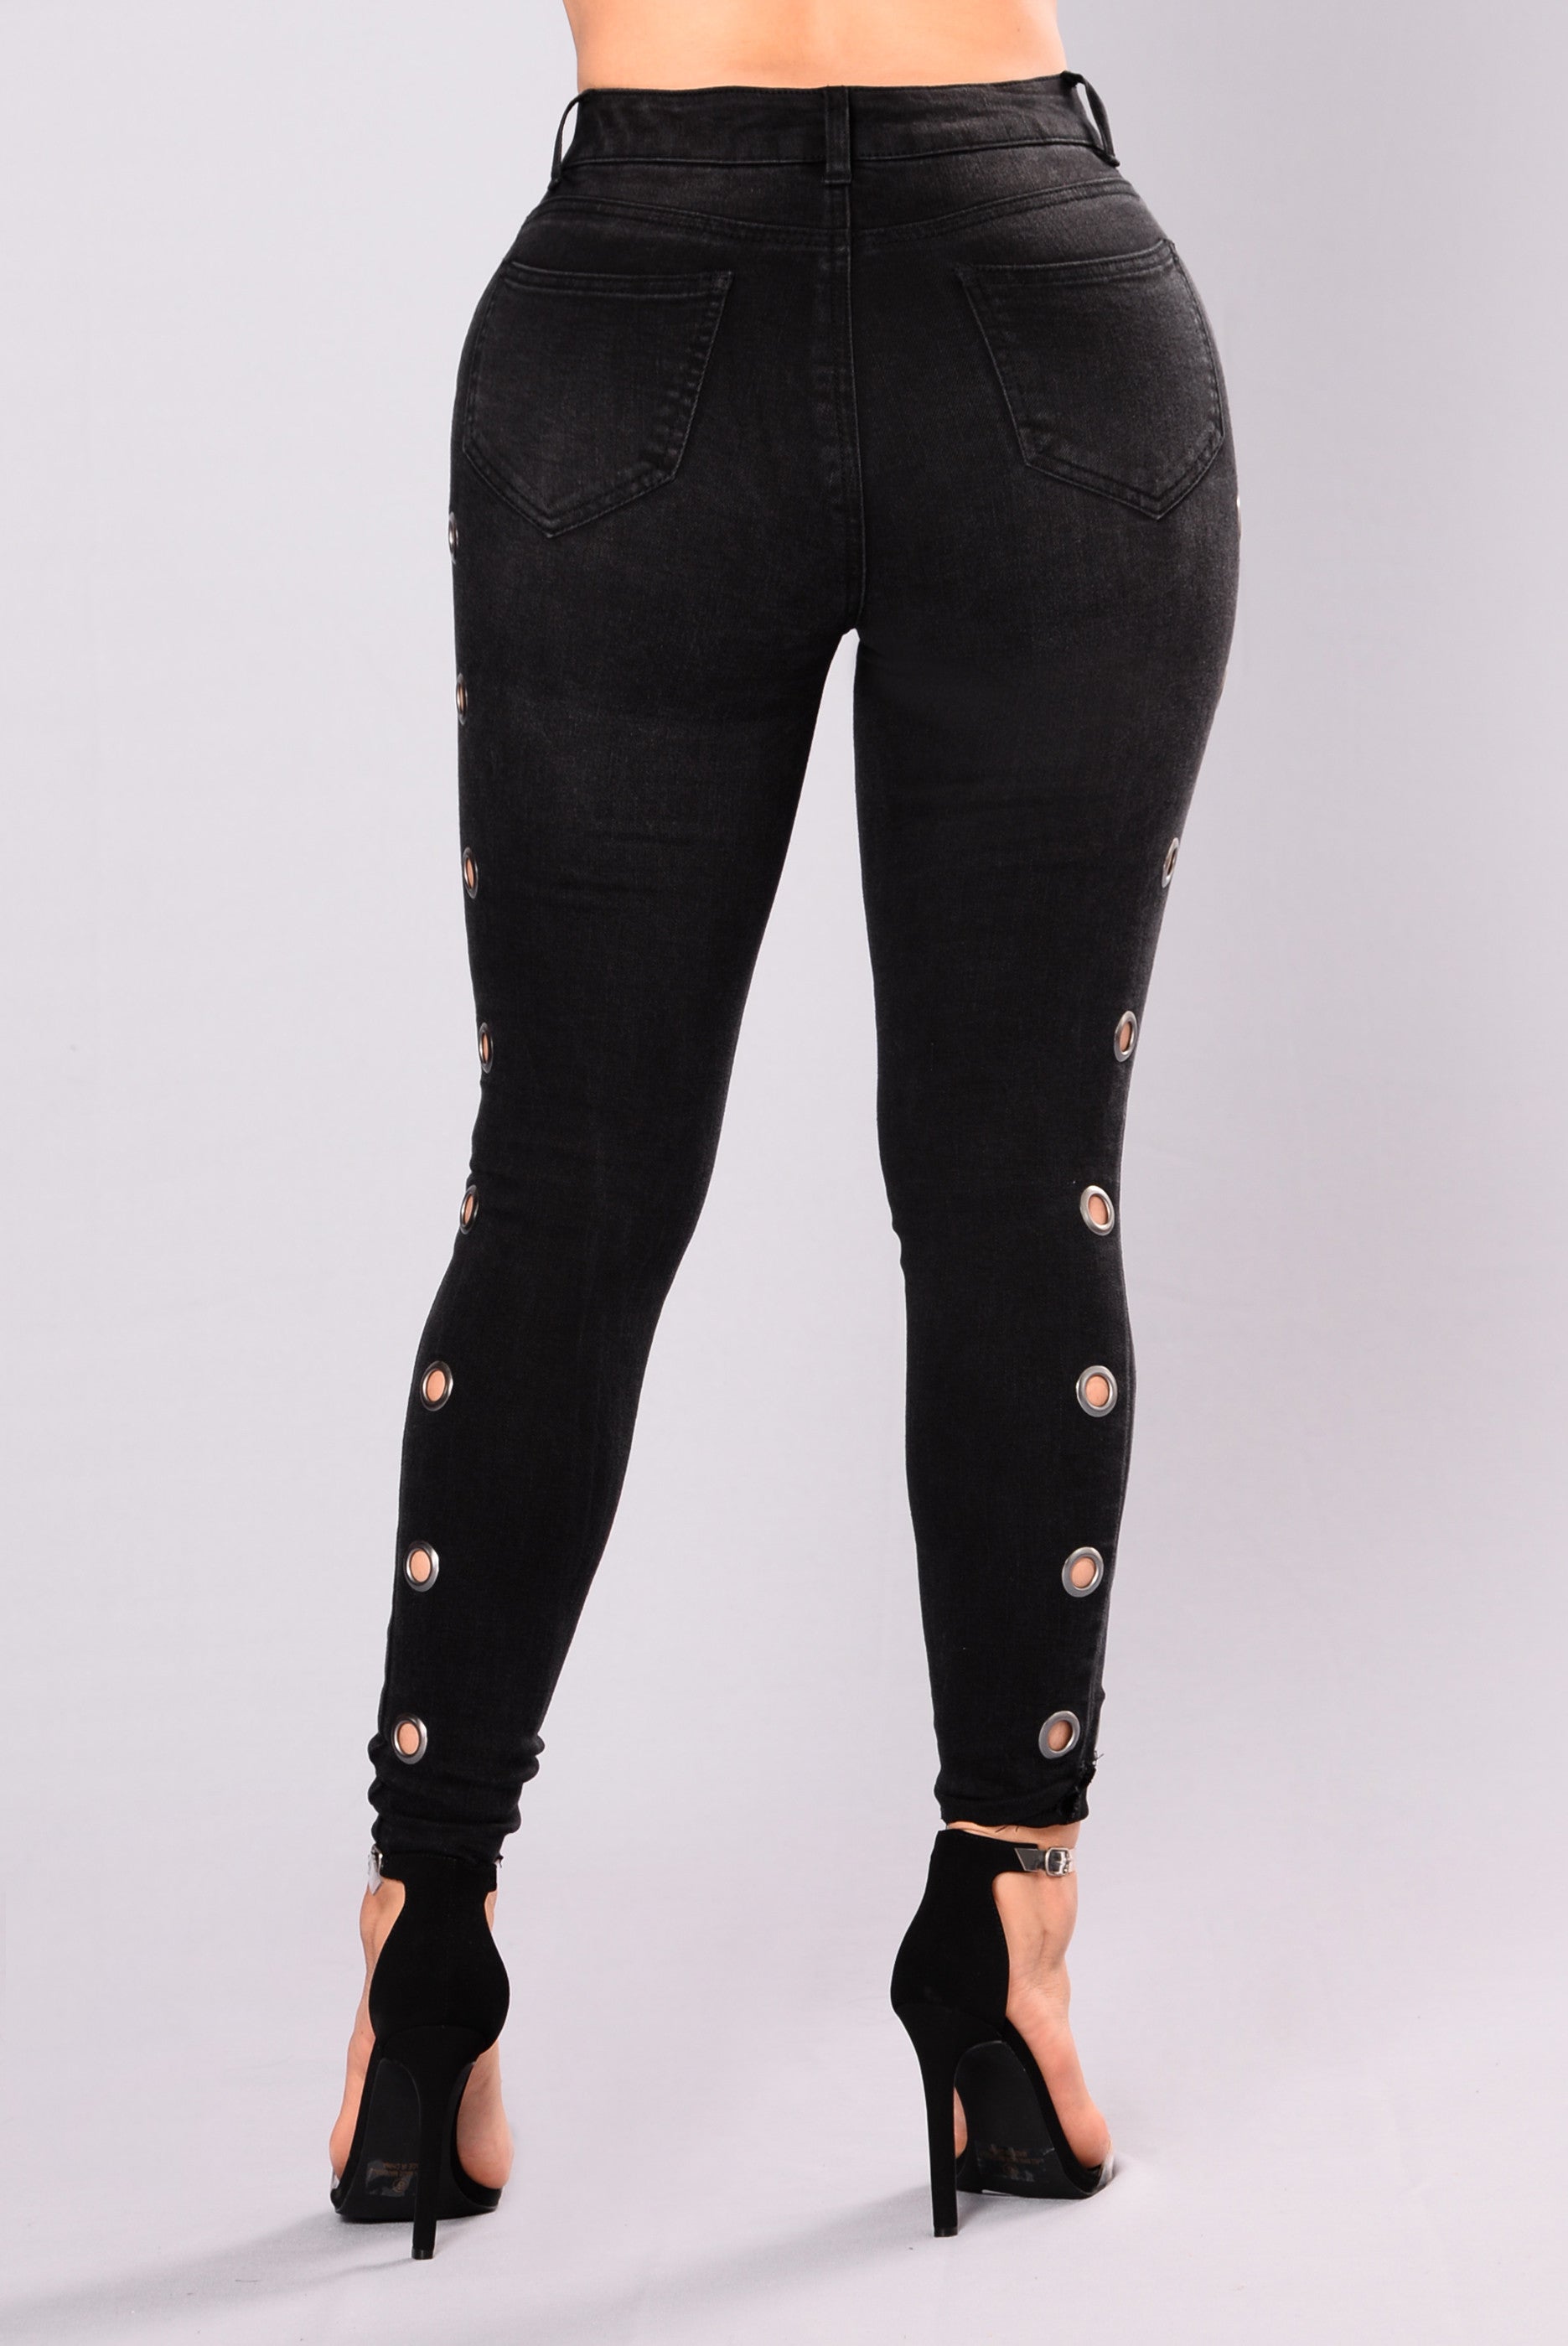 All Or Nothing Grommet Jeans - Black